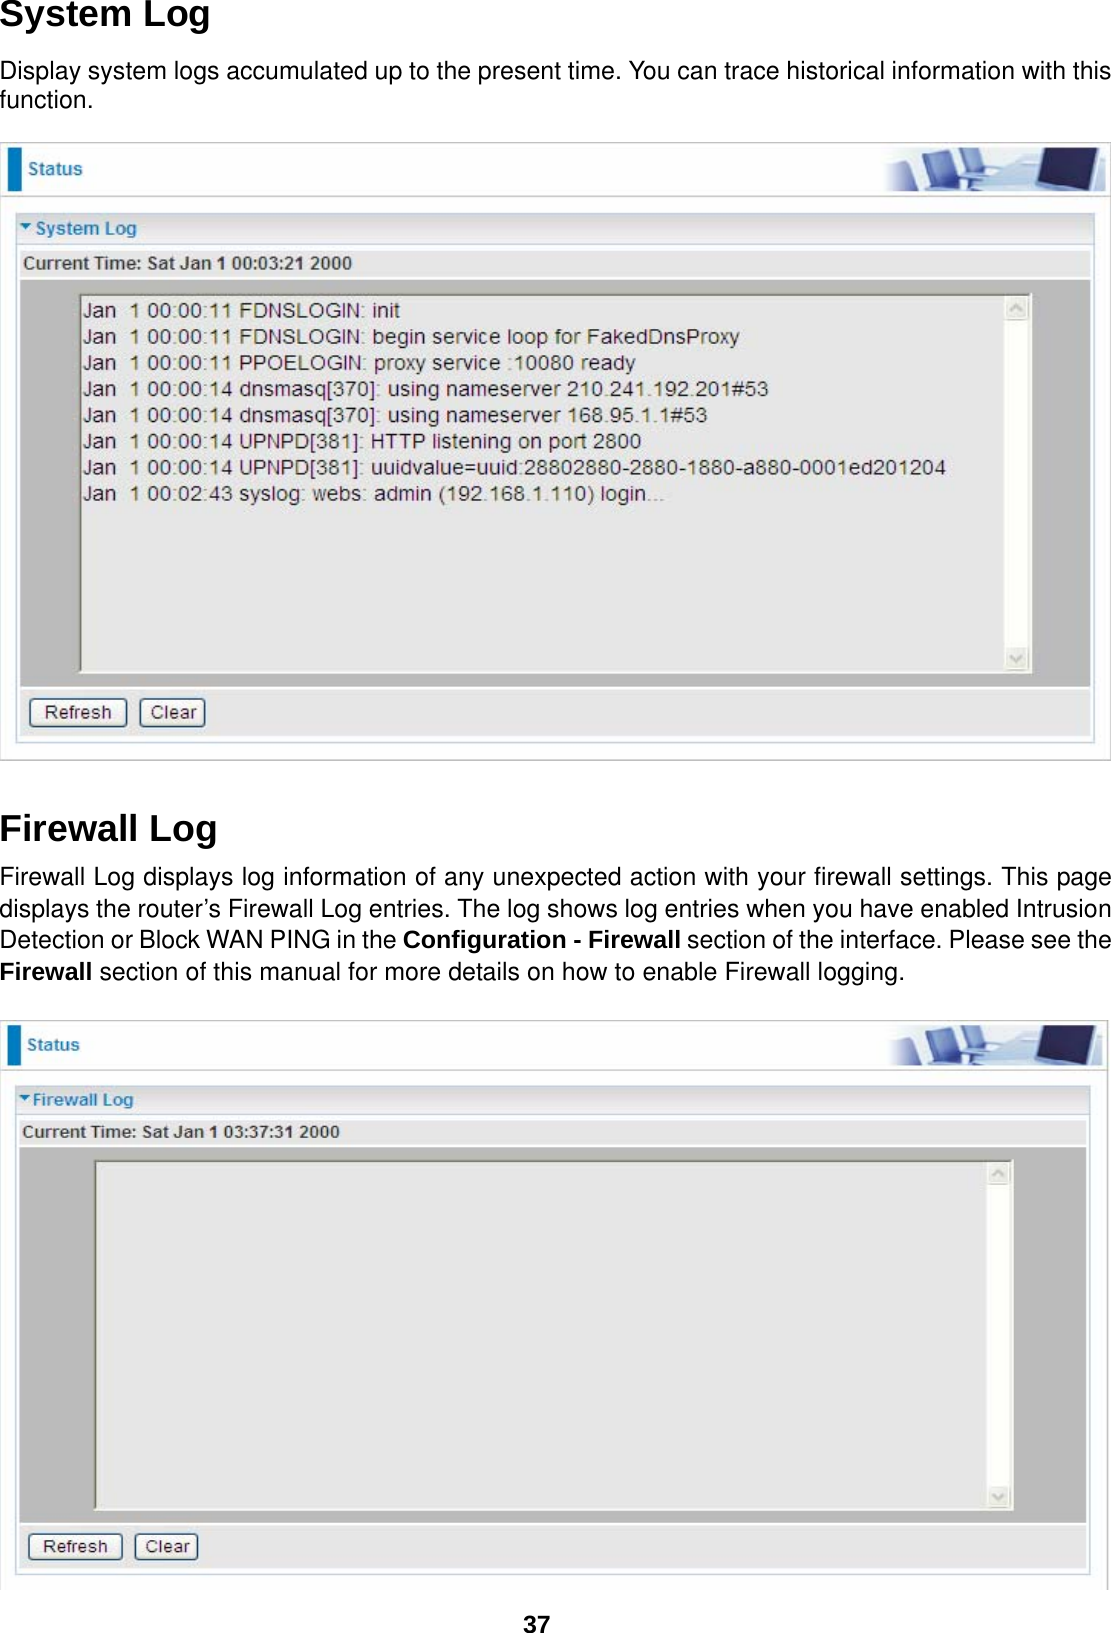  37 System Log Display system logs accumulated up to the present time. You can trace historical information with this function.     Firewall Log Firewall Log displays log information of any unexpected action with your firewall settings. This page displays the router’s Firewall Log entries. The log shows log entries when you have enabled Intrusion Detection or Block WAN PING in the Configuration - Firewall section of the interface. Please see the Firewall section of this manual for more details on how to enable Firewall logging.    